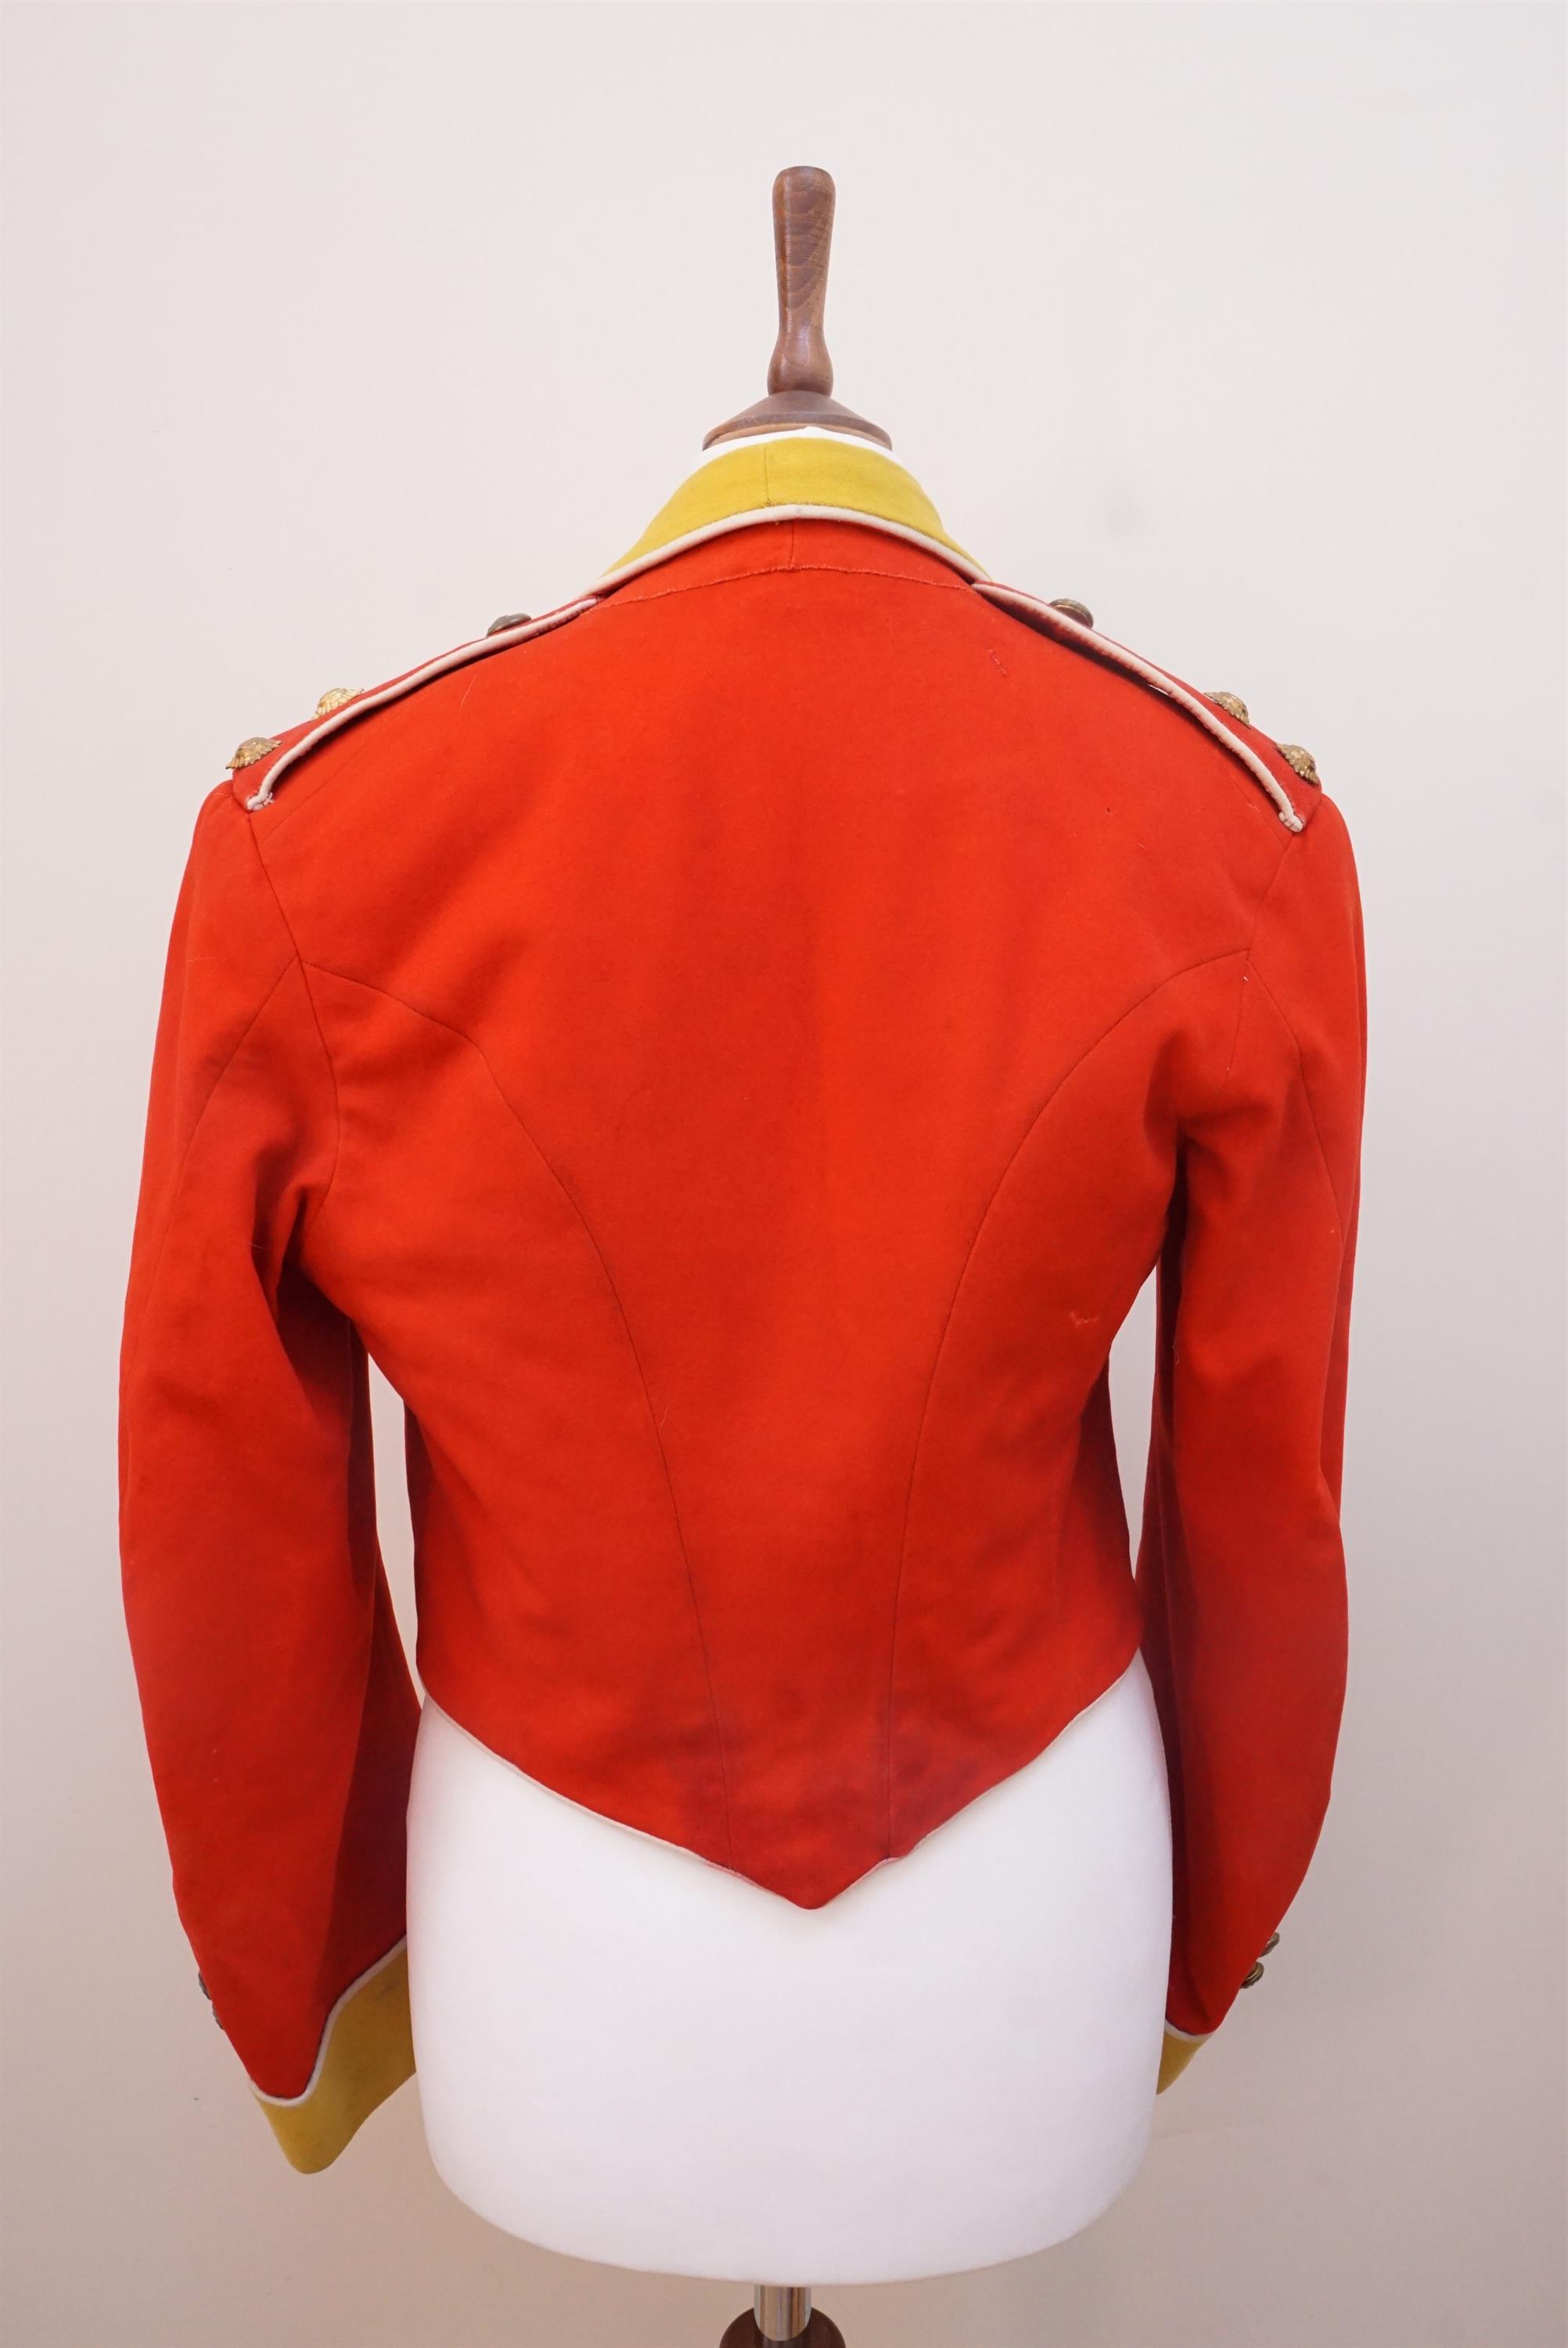 A late 19th / early 20th Century Border Regiment officer's mess dress jacket and vest, together with - Image 5 of 12